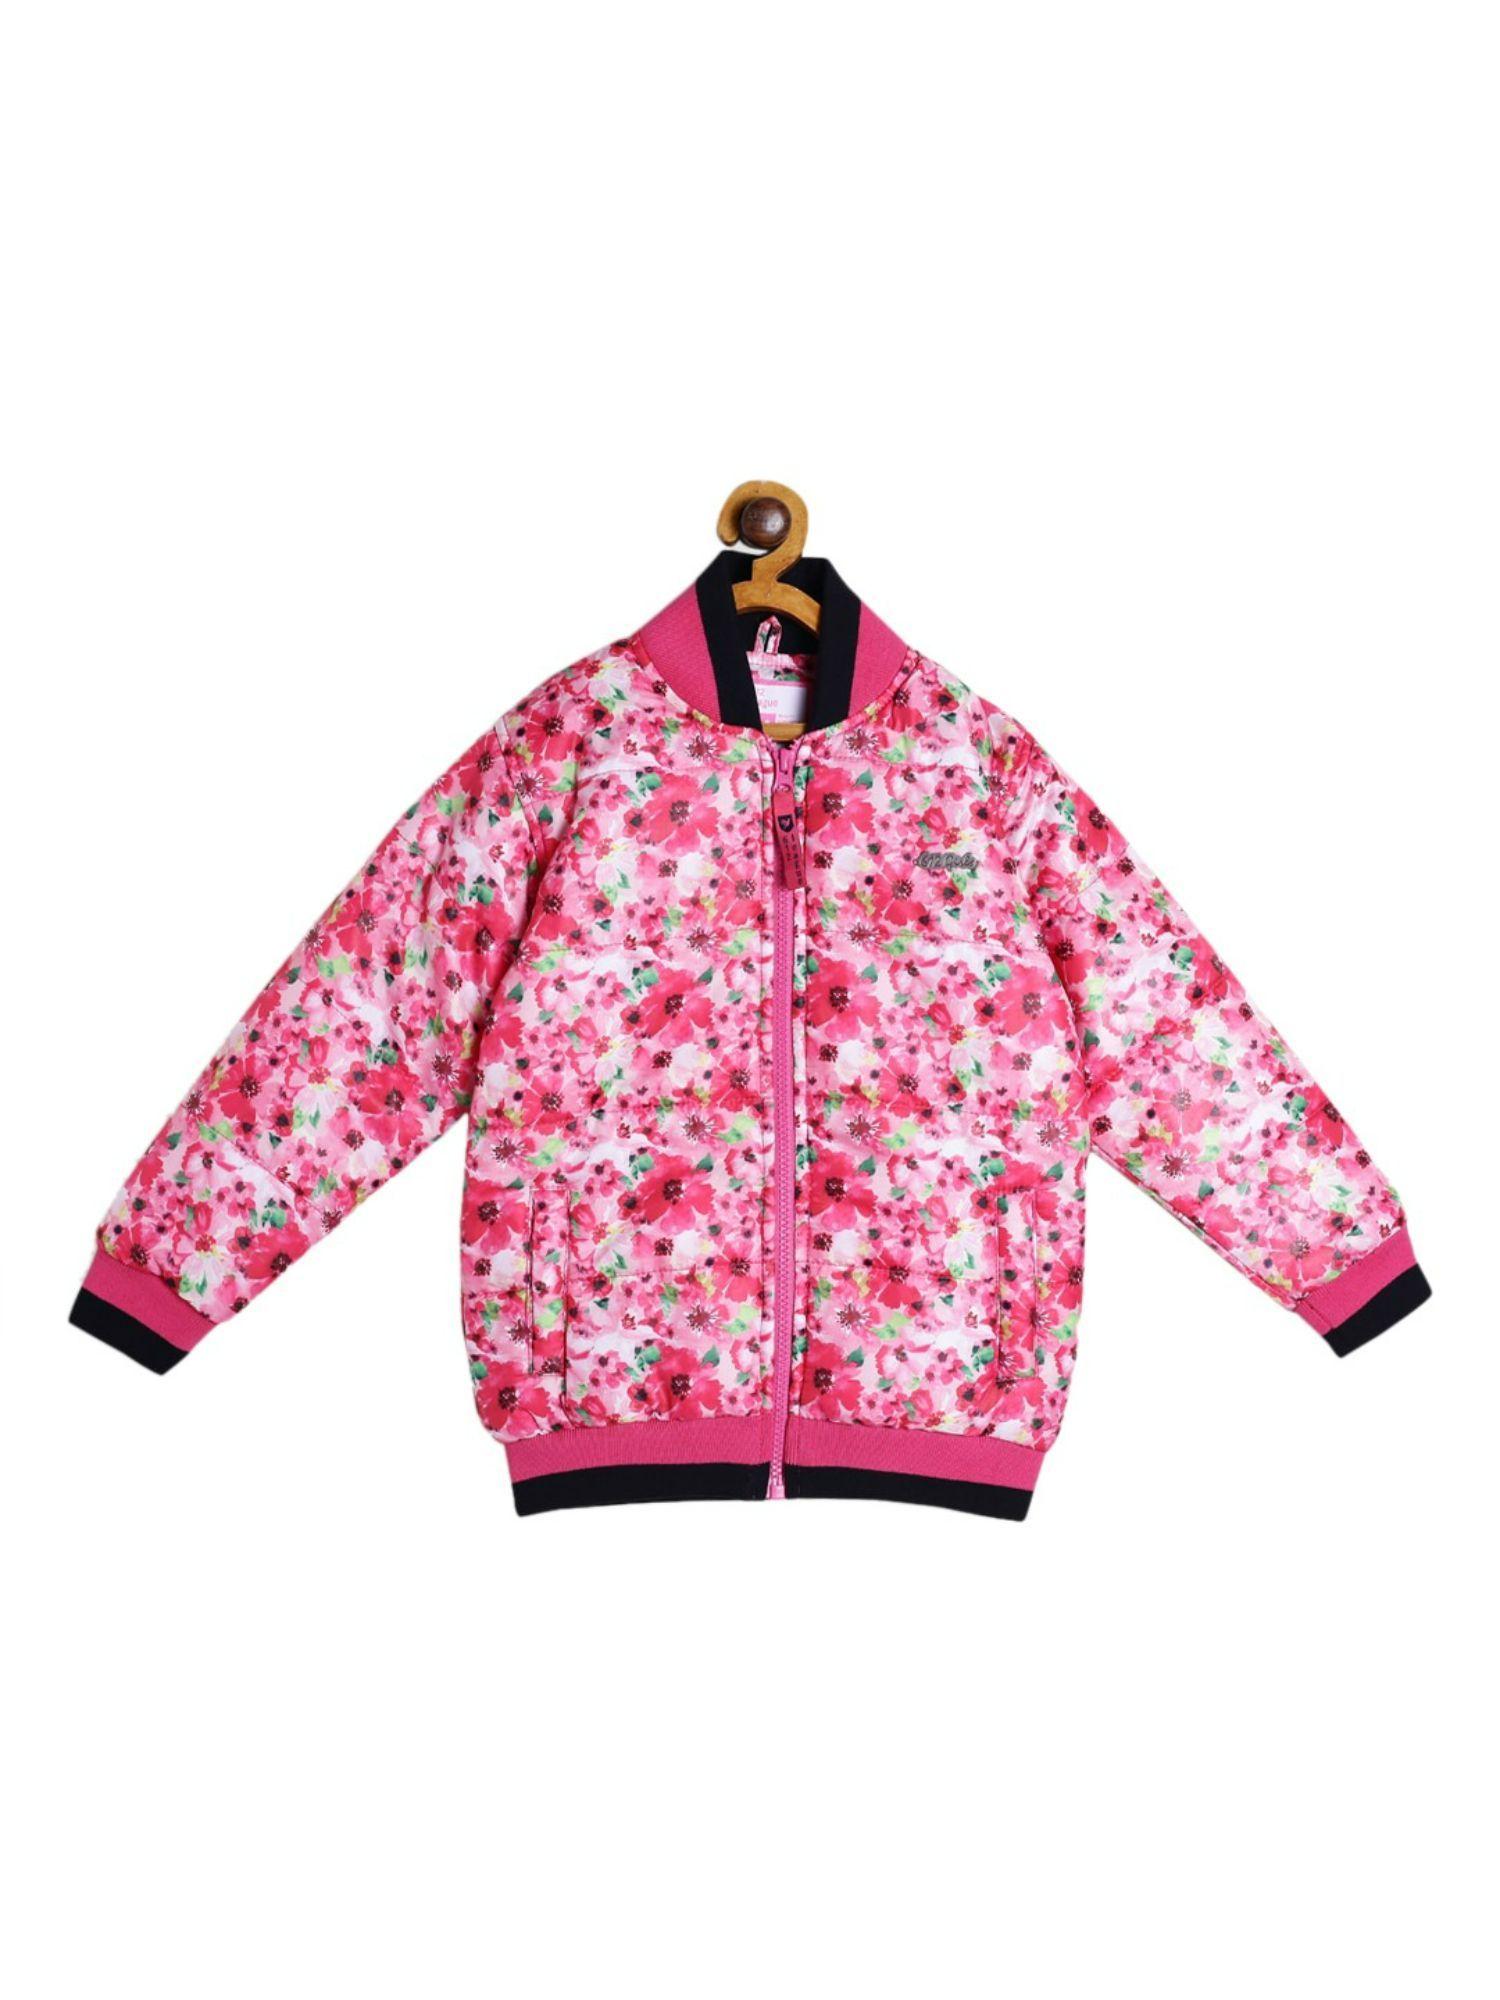 Girl's Jacket In Fuchsia Color